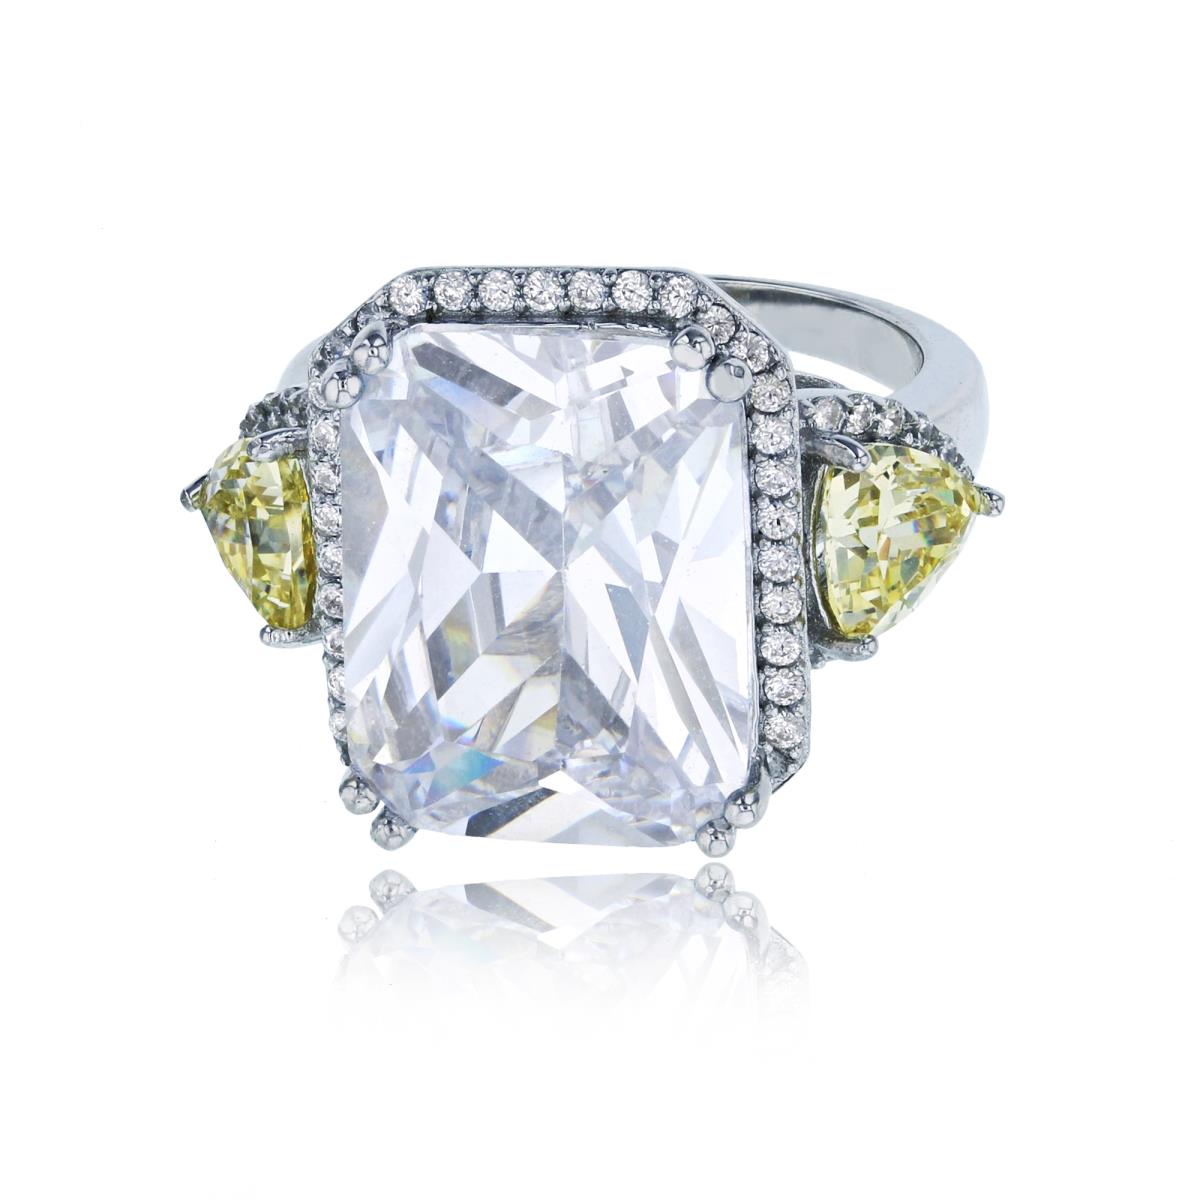 Sterling Silver Rhodium 16x12mm White Radiant Cut CZ & 6mm Canary Yellow Trillion Cut Glass Sides Ladies Ring